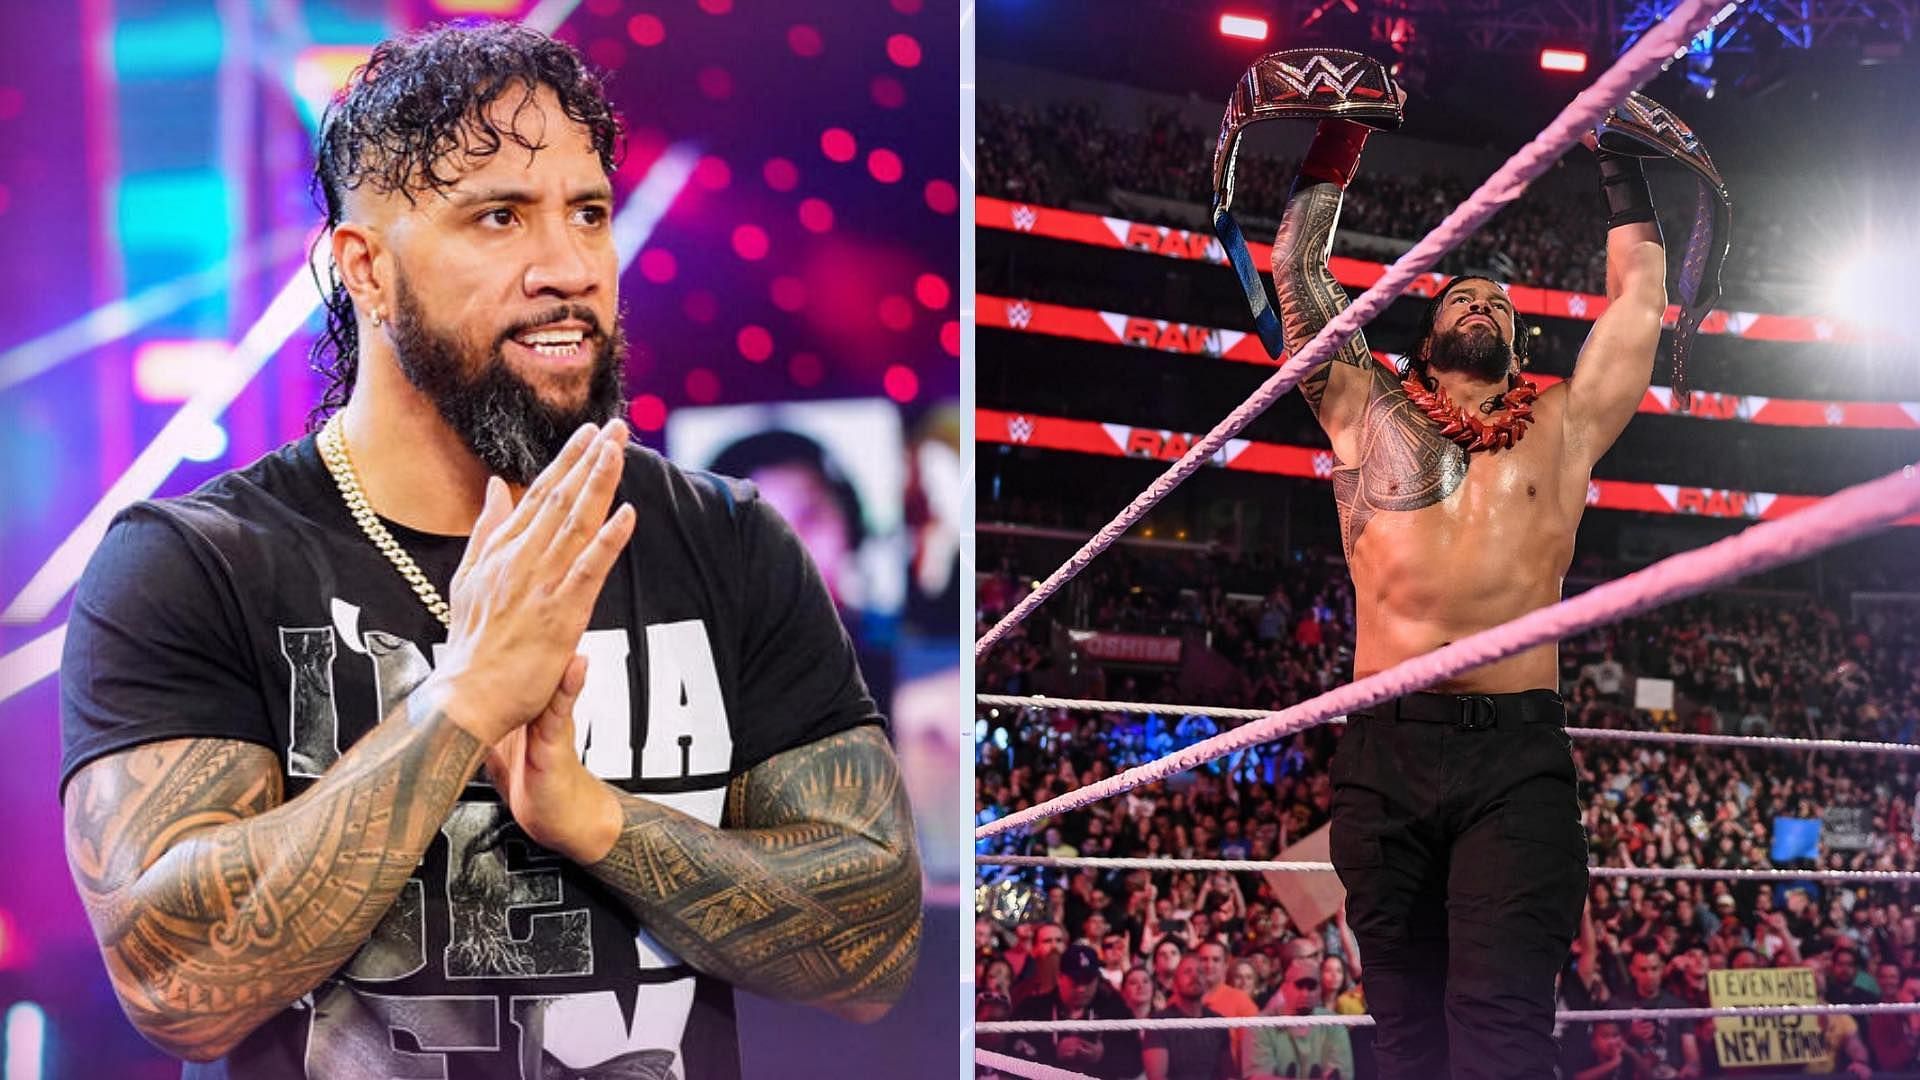 Jey Uso may be the one to dethrone the Undisputed WWE Universal Champion Roman Reigns